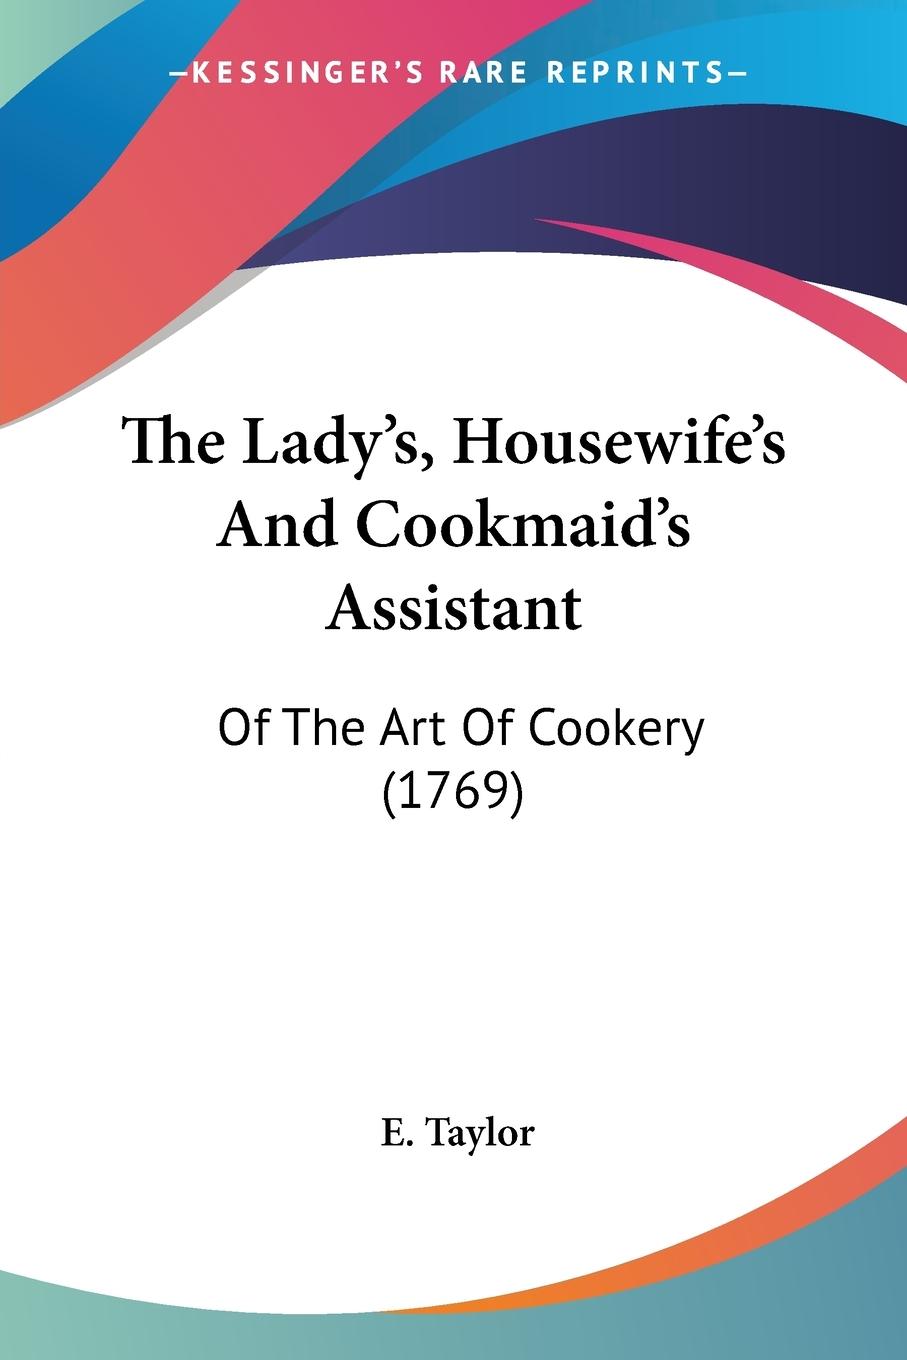 The Lady s, Housewife s And Cookmaid s Assistant - Taylor, E.